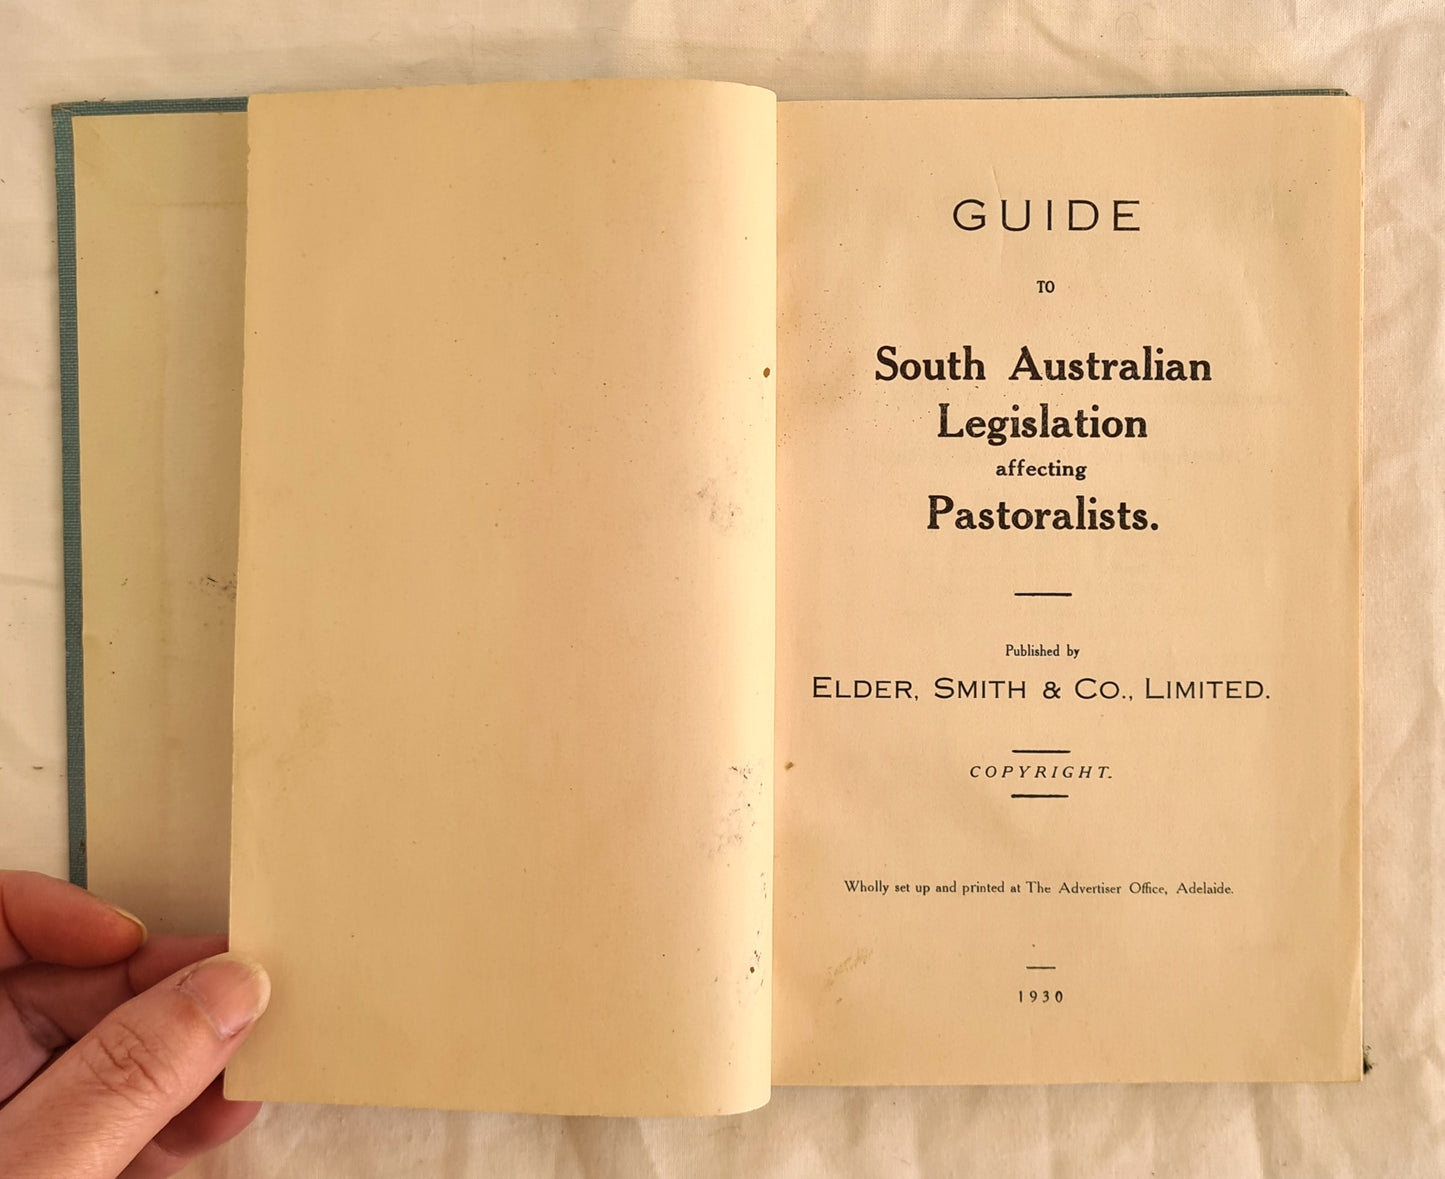 Guide to South Australian Legislation affecting Pastoralists by Elder, Smith & Co.